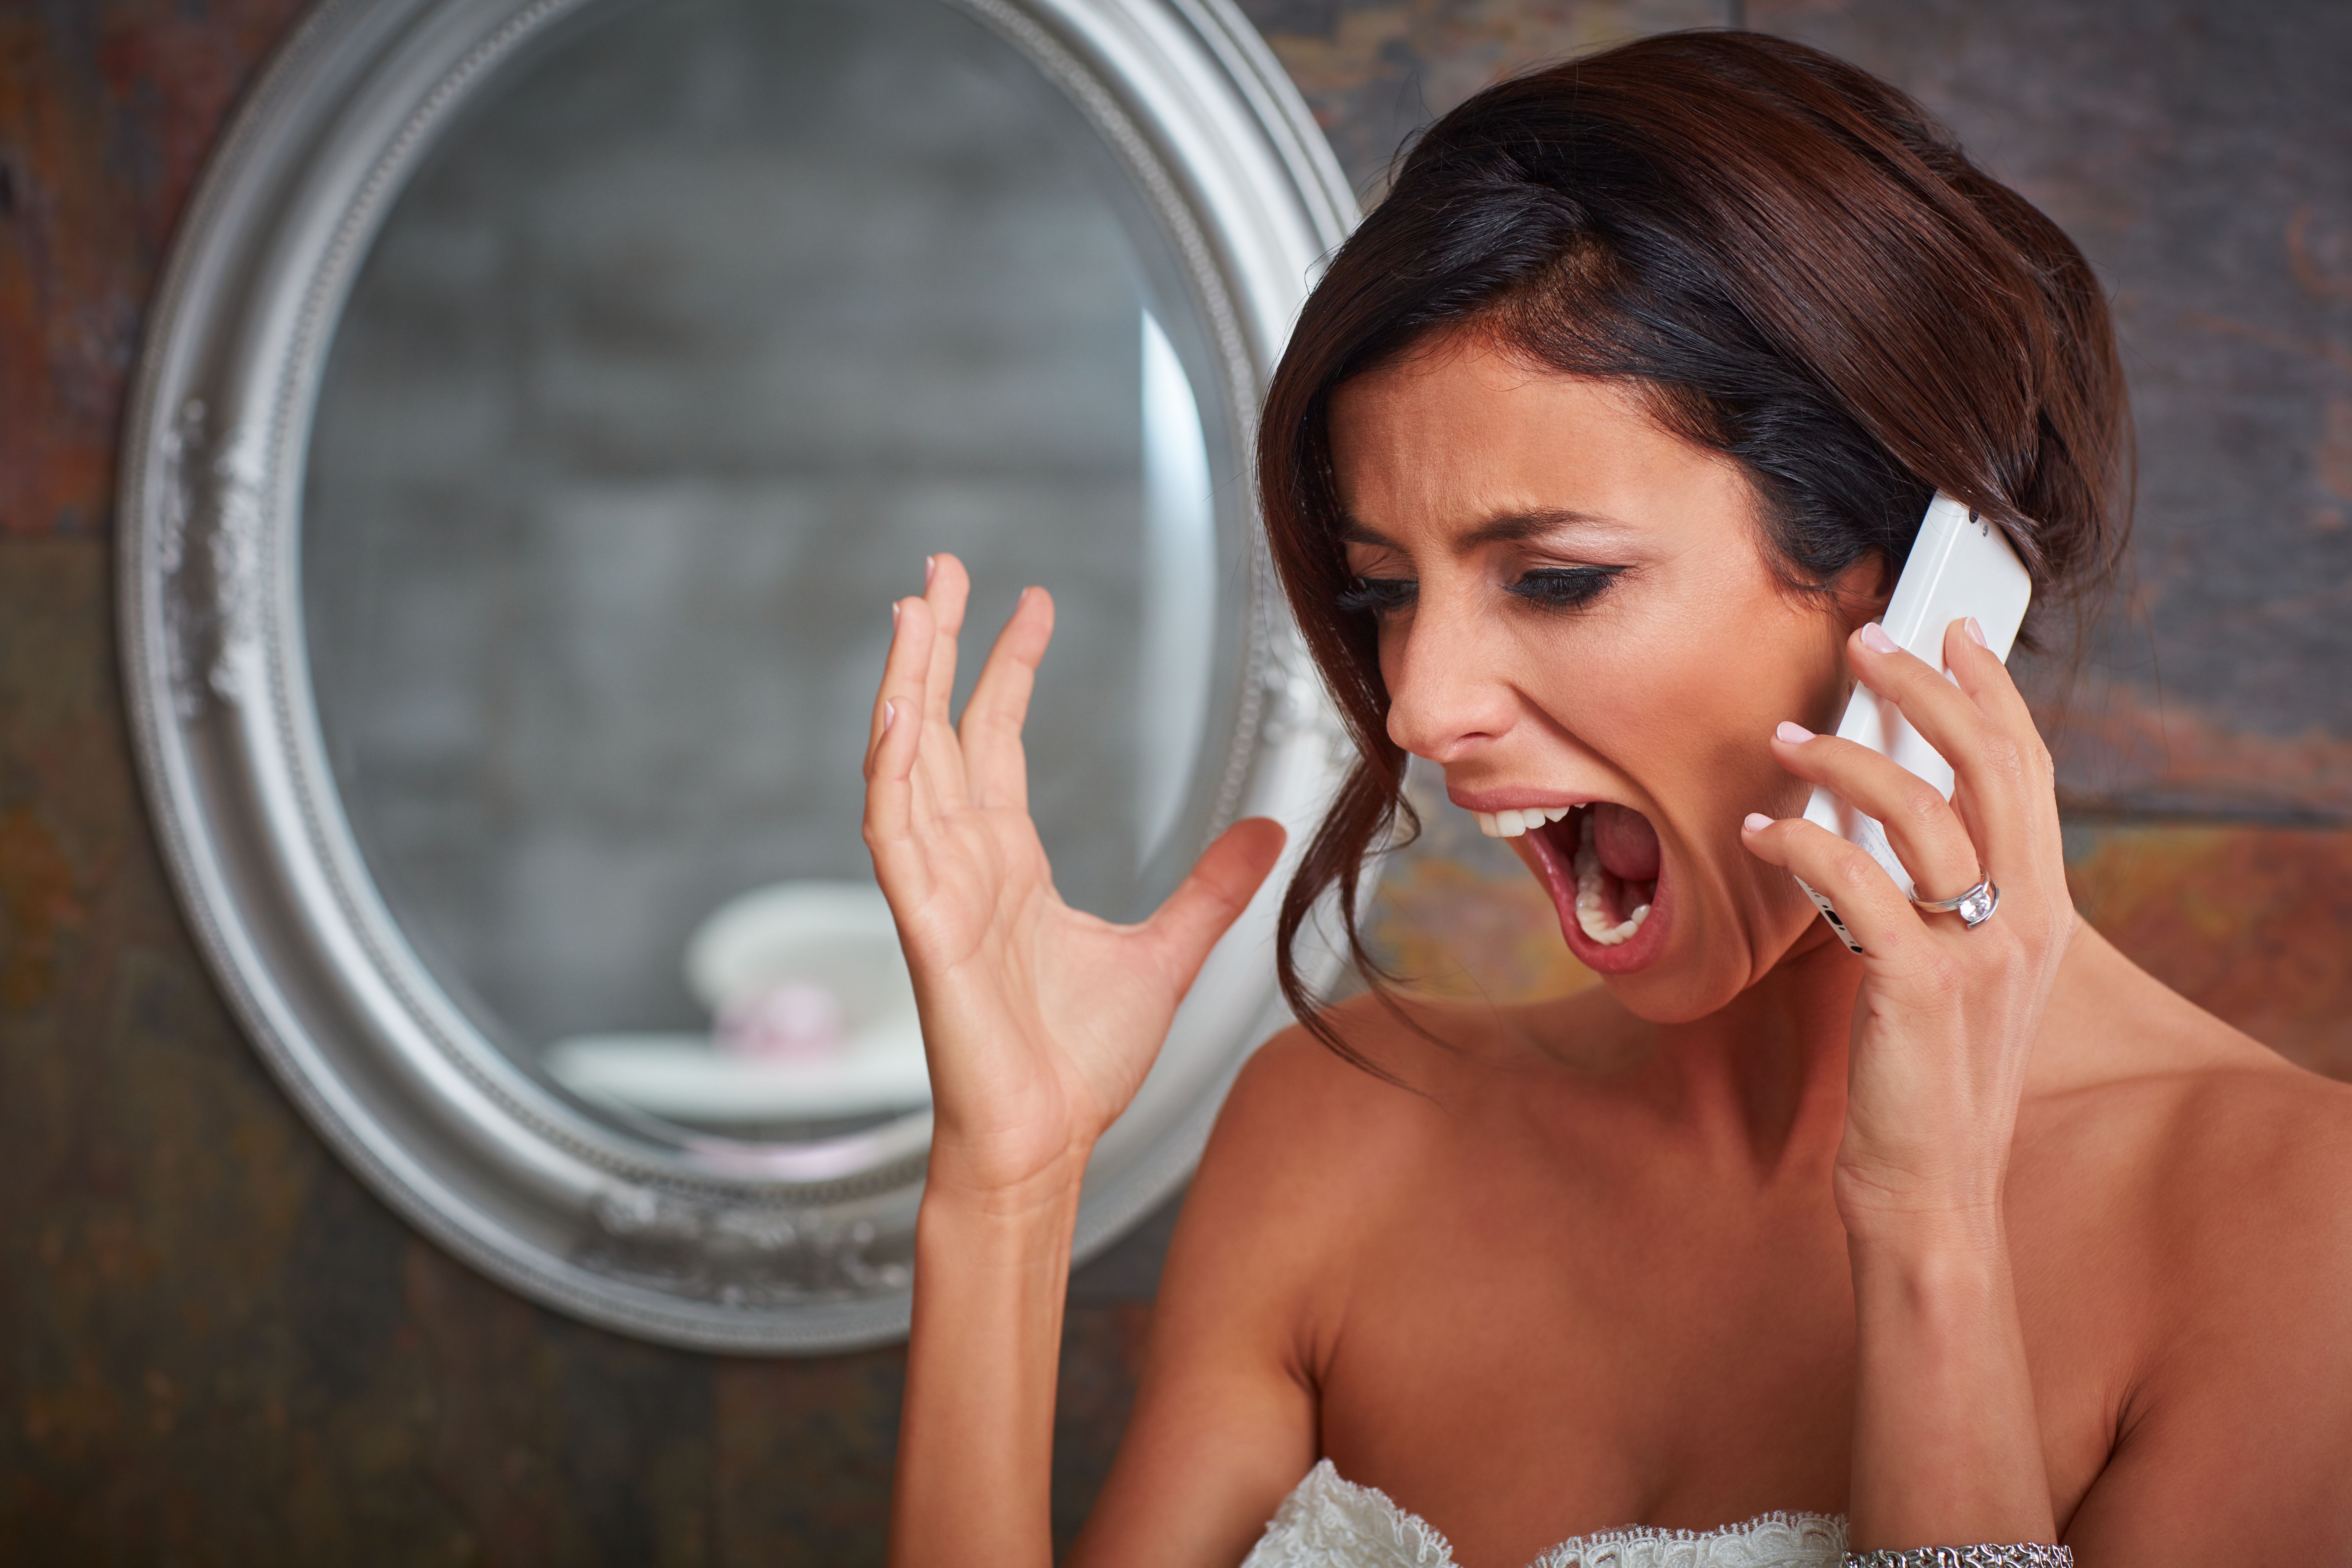 A bride shouting on the phone | Source: Shutterstock